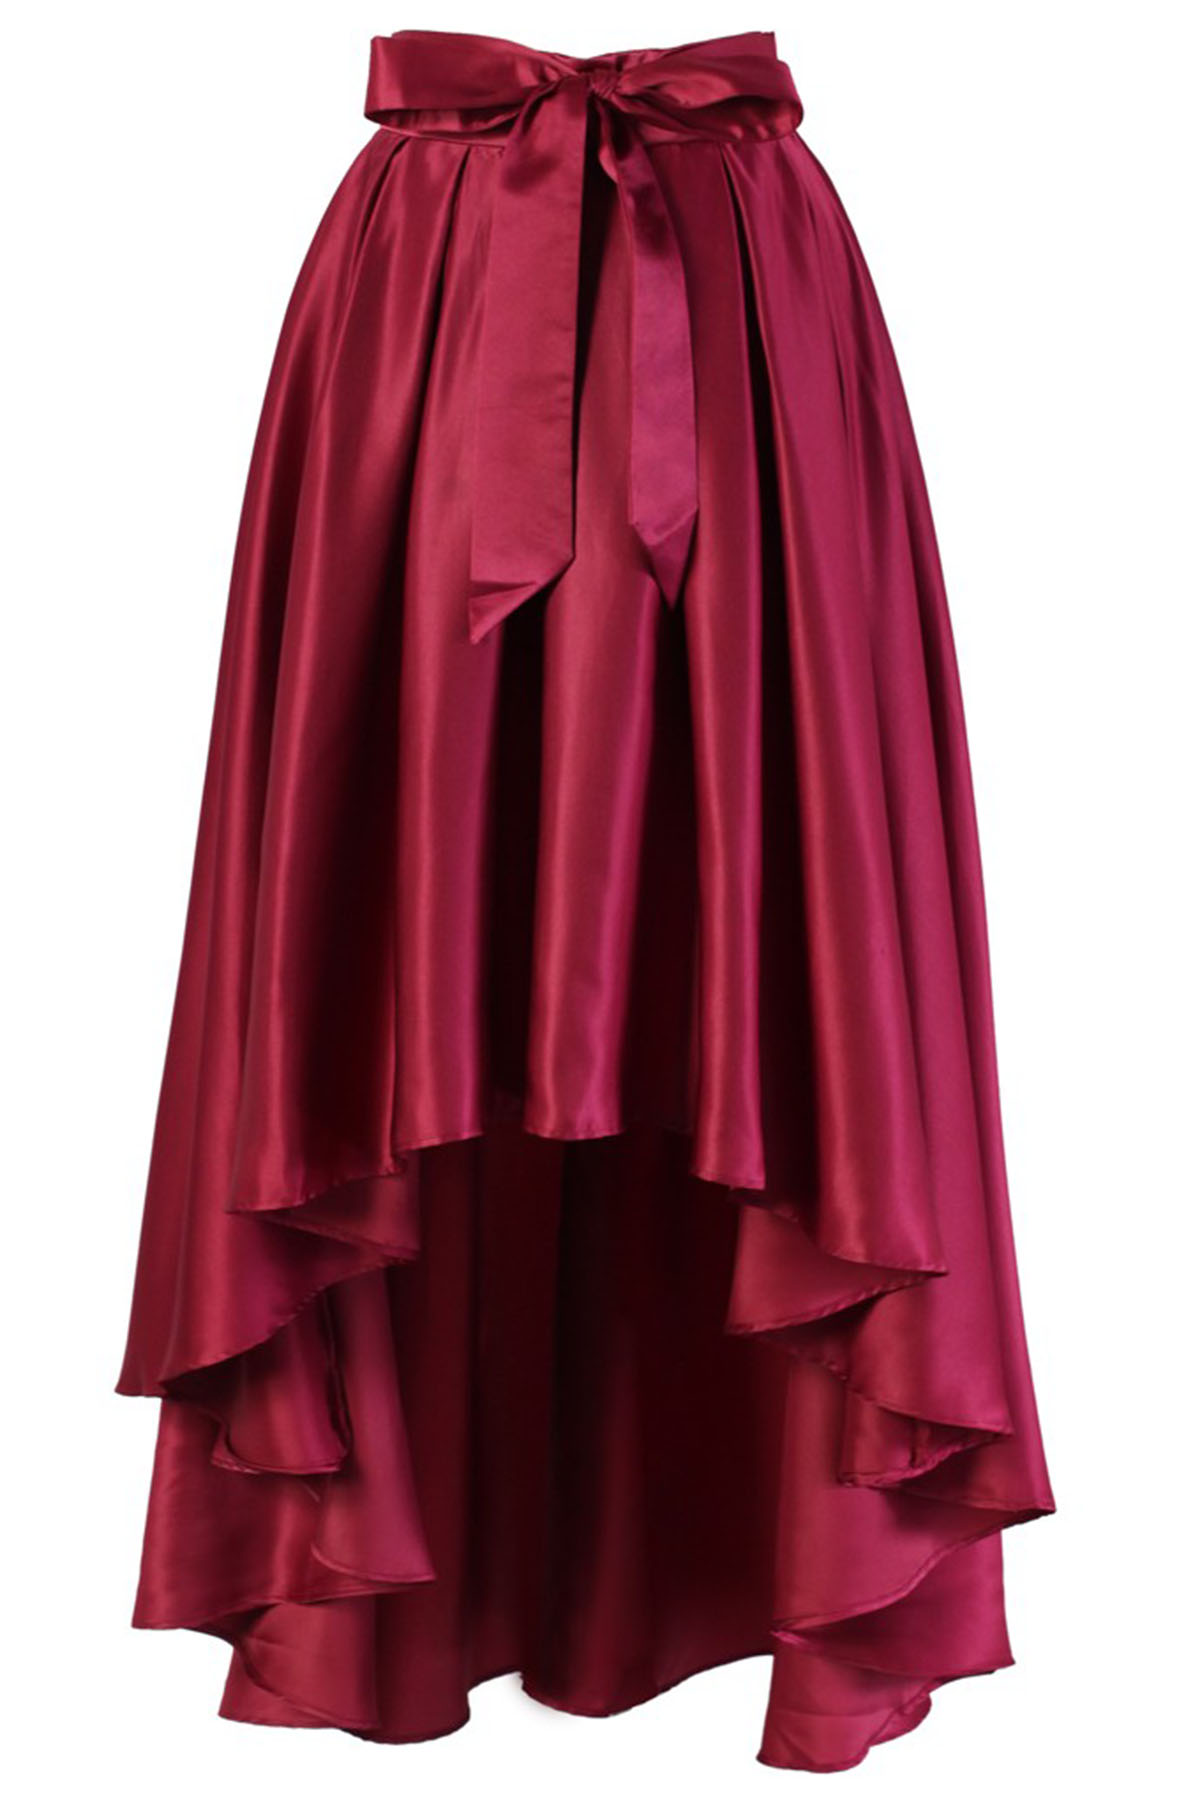 Burgundy Satin High-low Skirt With Front Bow